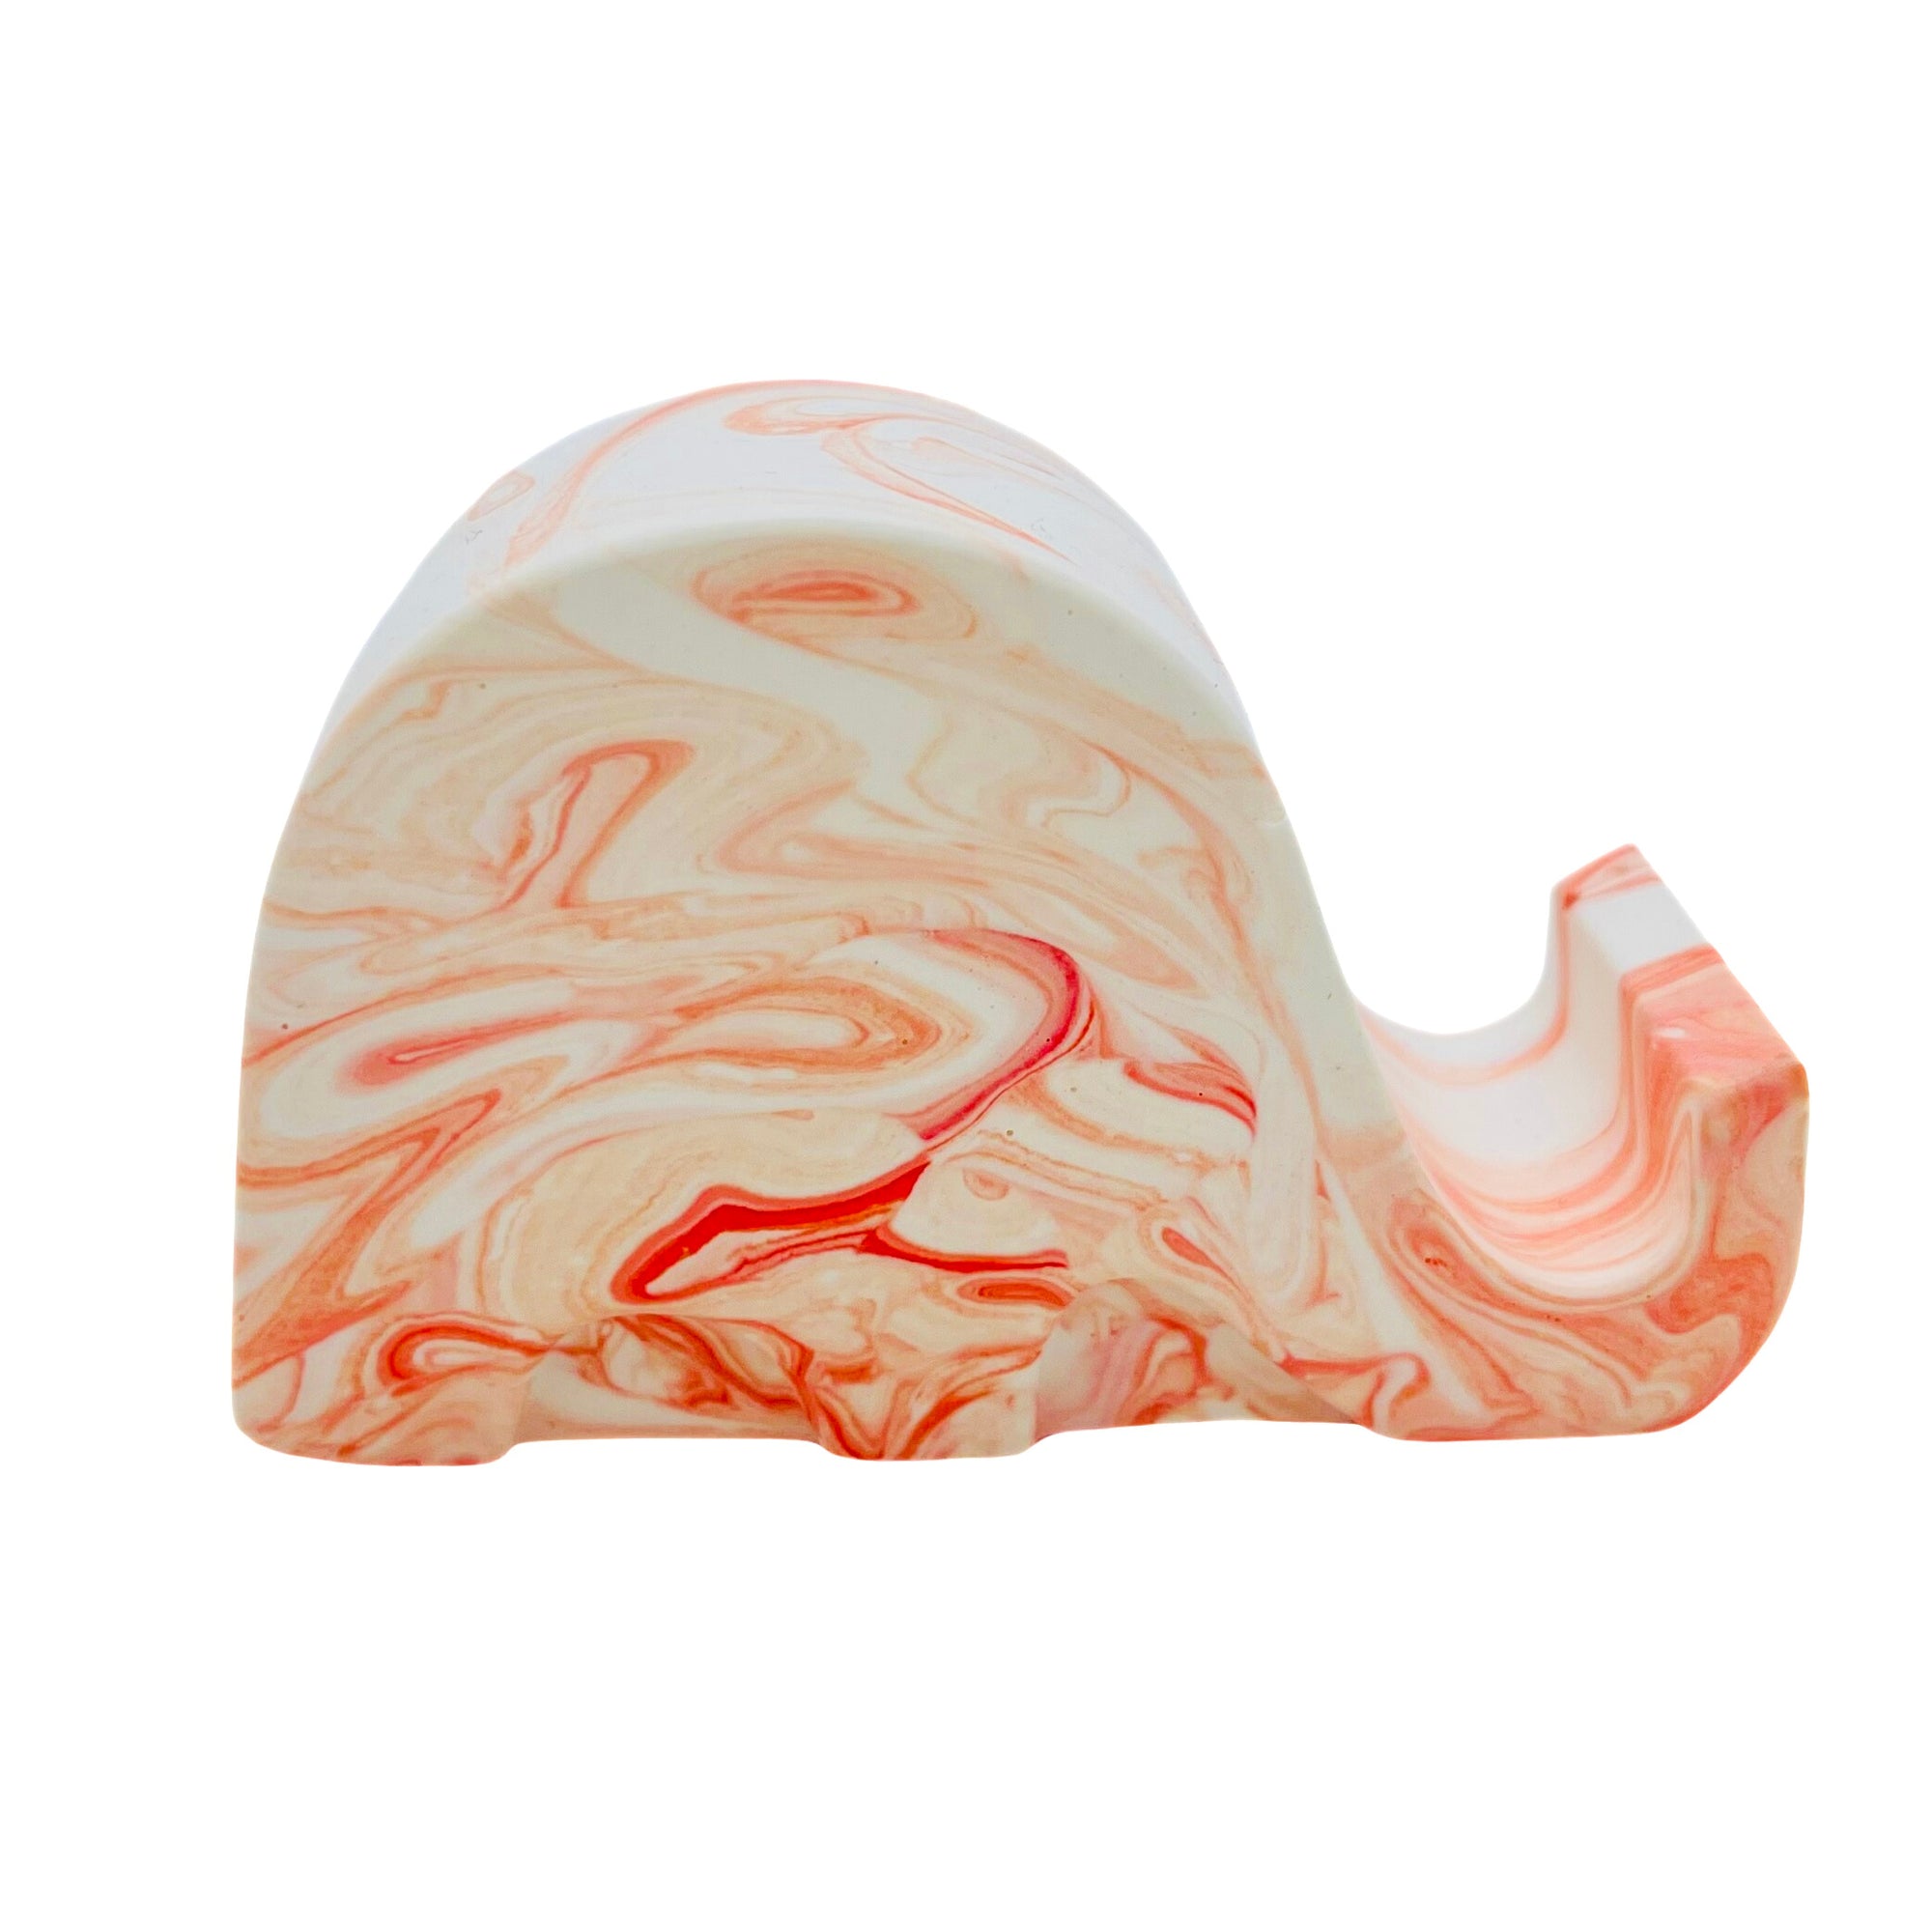 A Jesmonite elephant mobile phone stand measuring 6.5cm in length marbled with orange pigment.